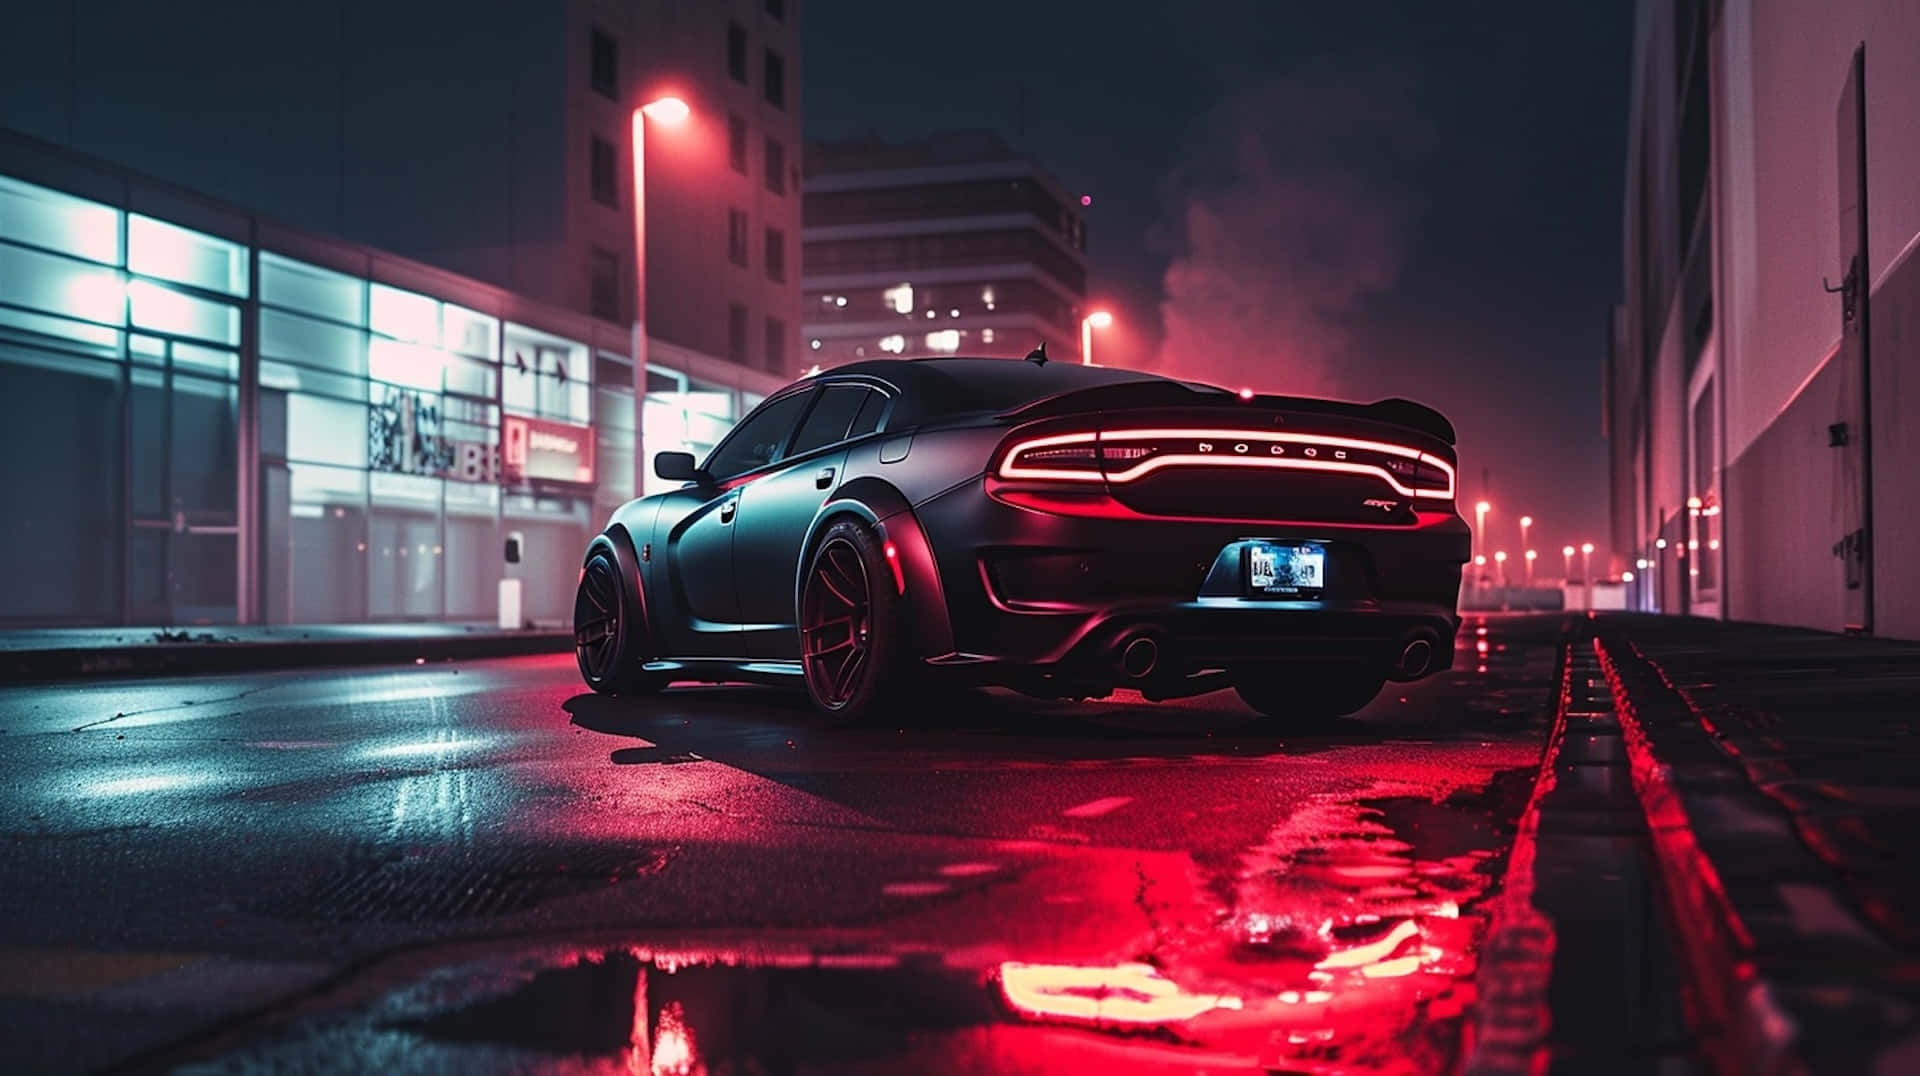 Dodge Charger Hellcat Nighttime Cityscape Wallpaper